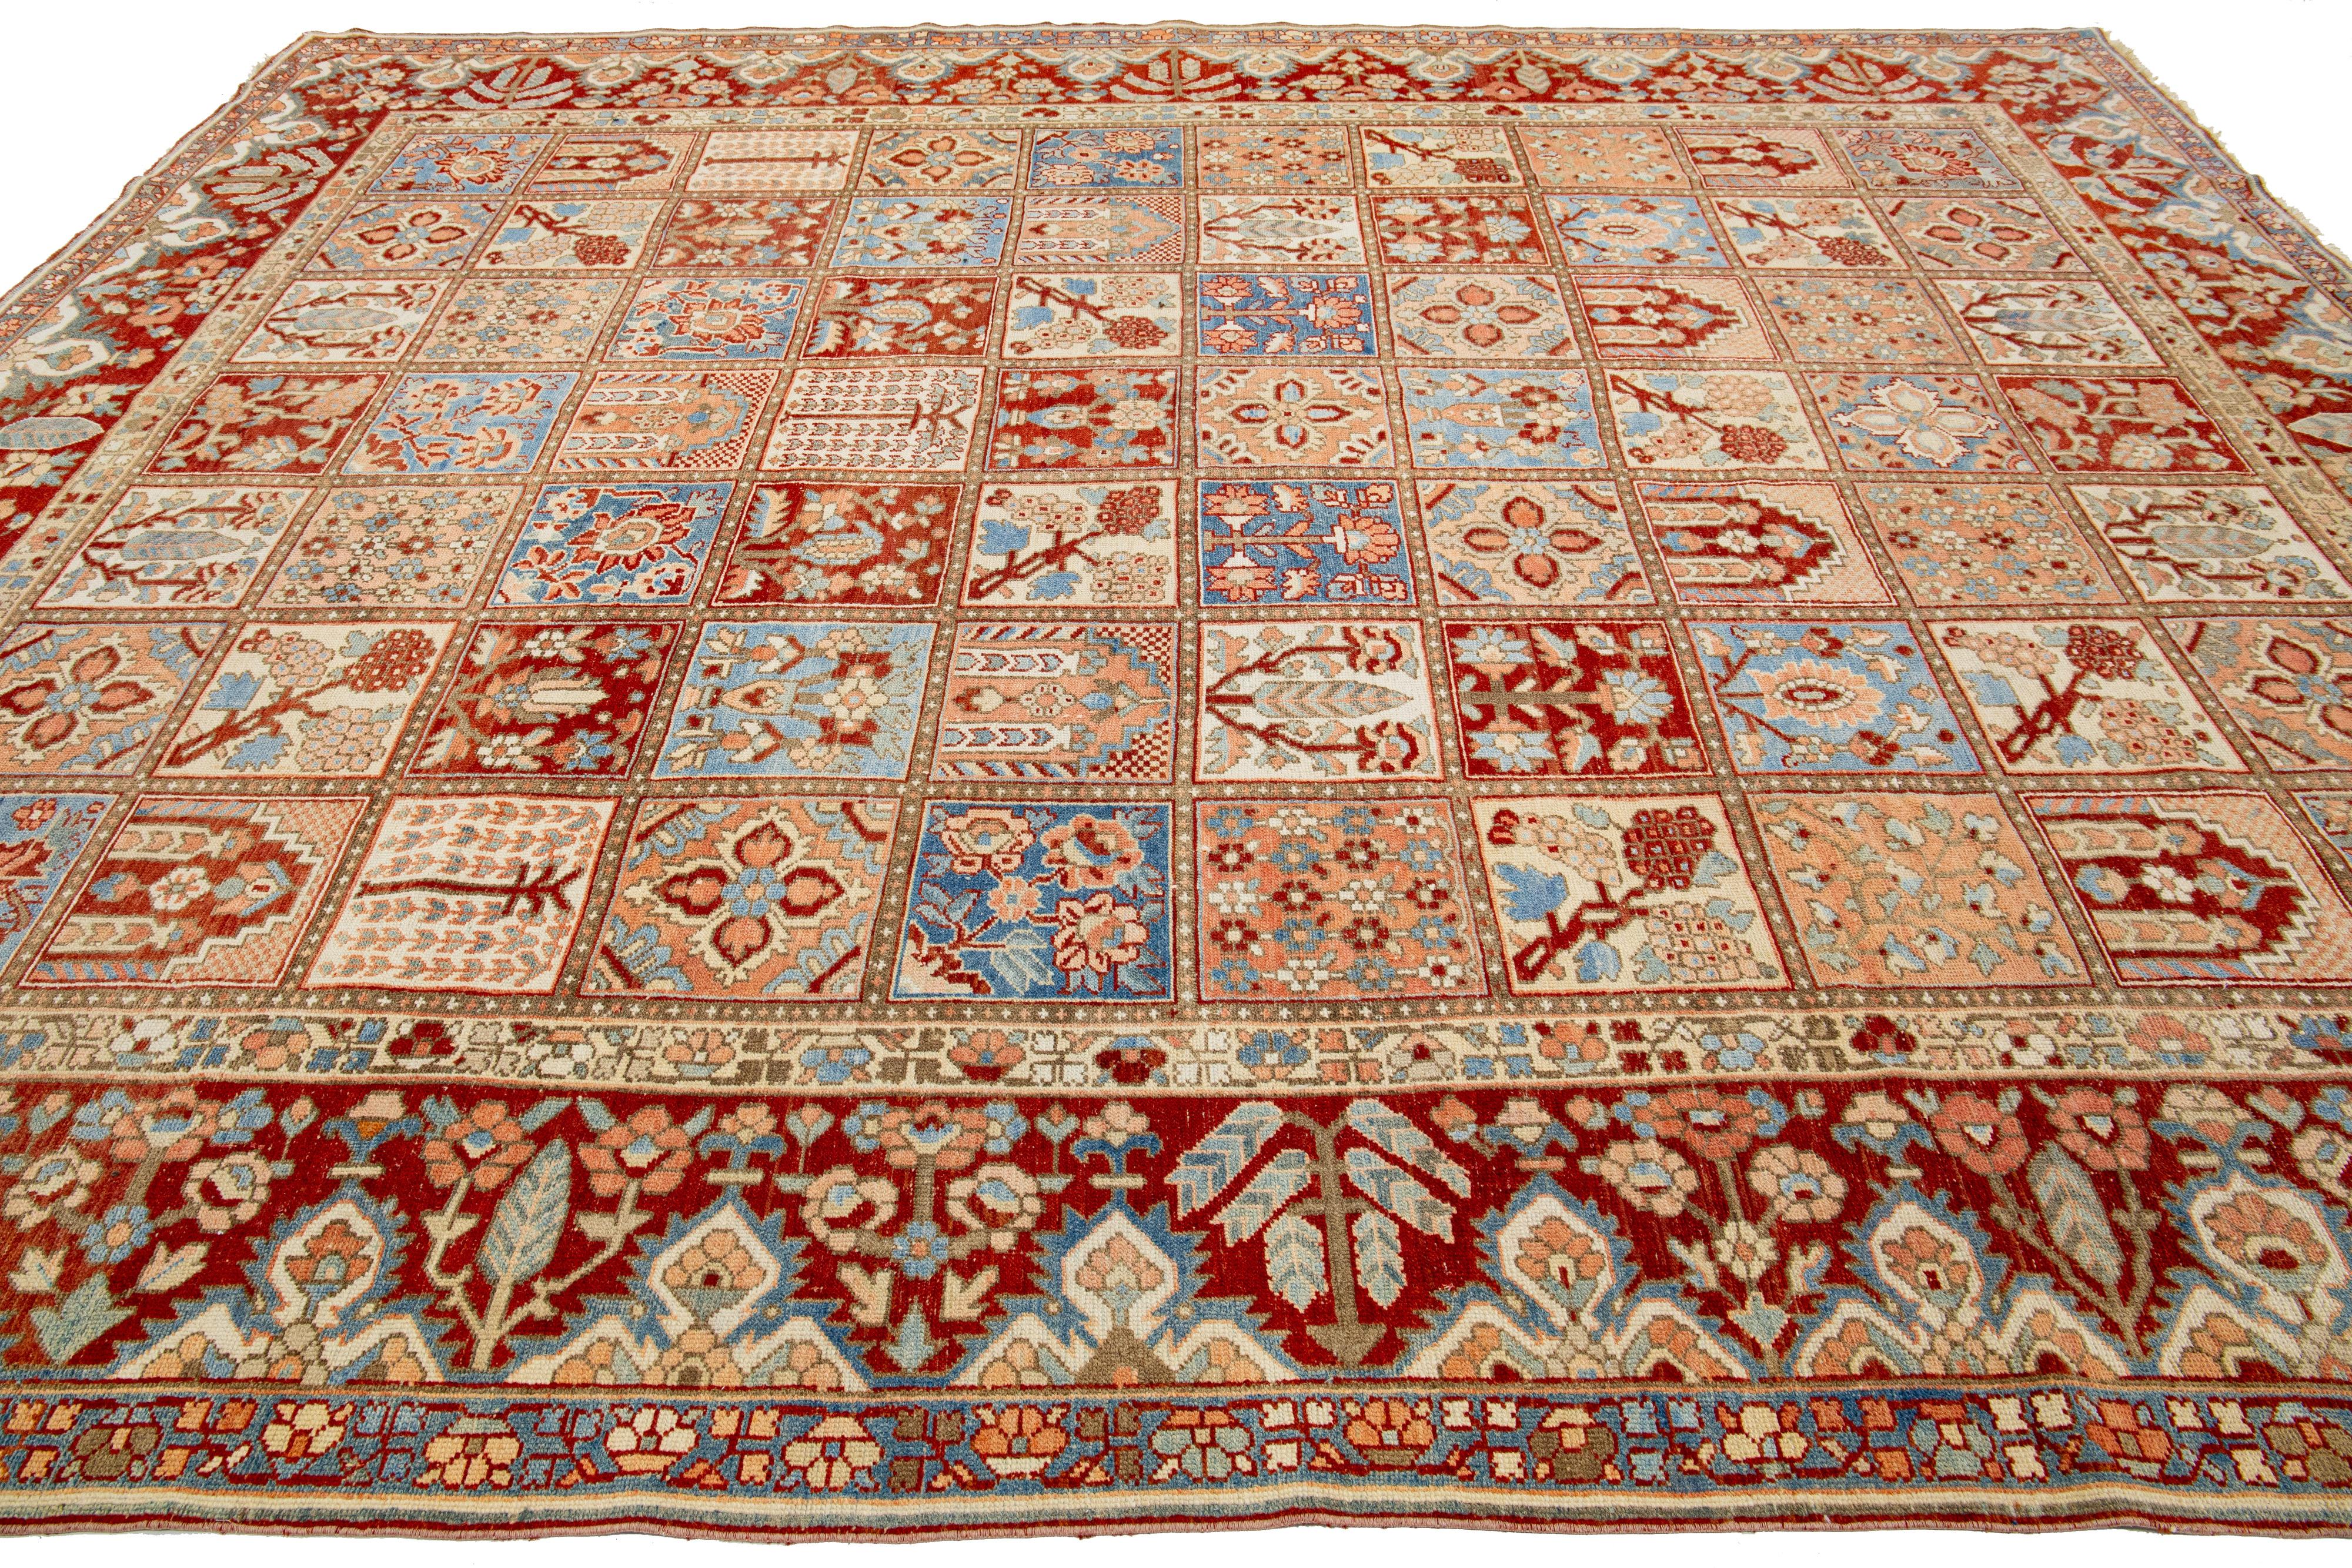 Persian 1920s Bakhtiari Multicolor Wool Rug With Allover Pattern In Good Condition For Sale In Norwalk, CT